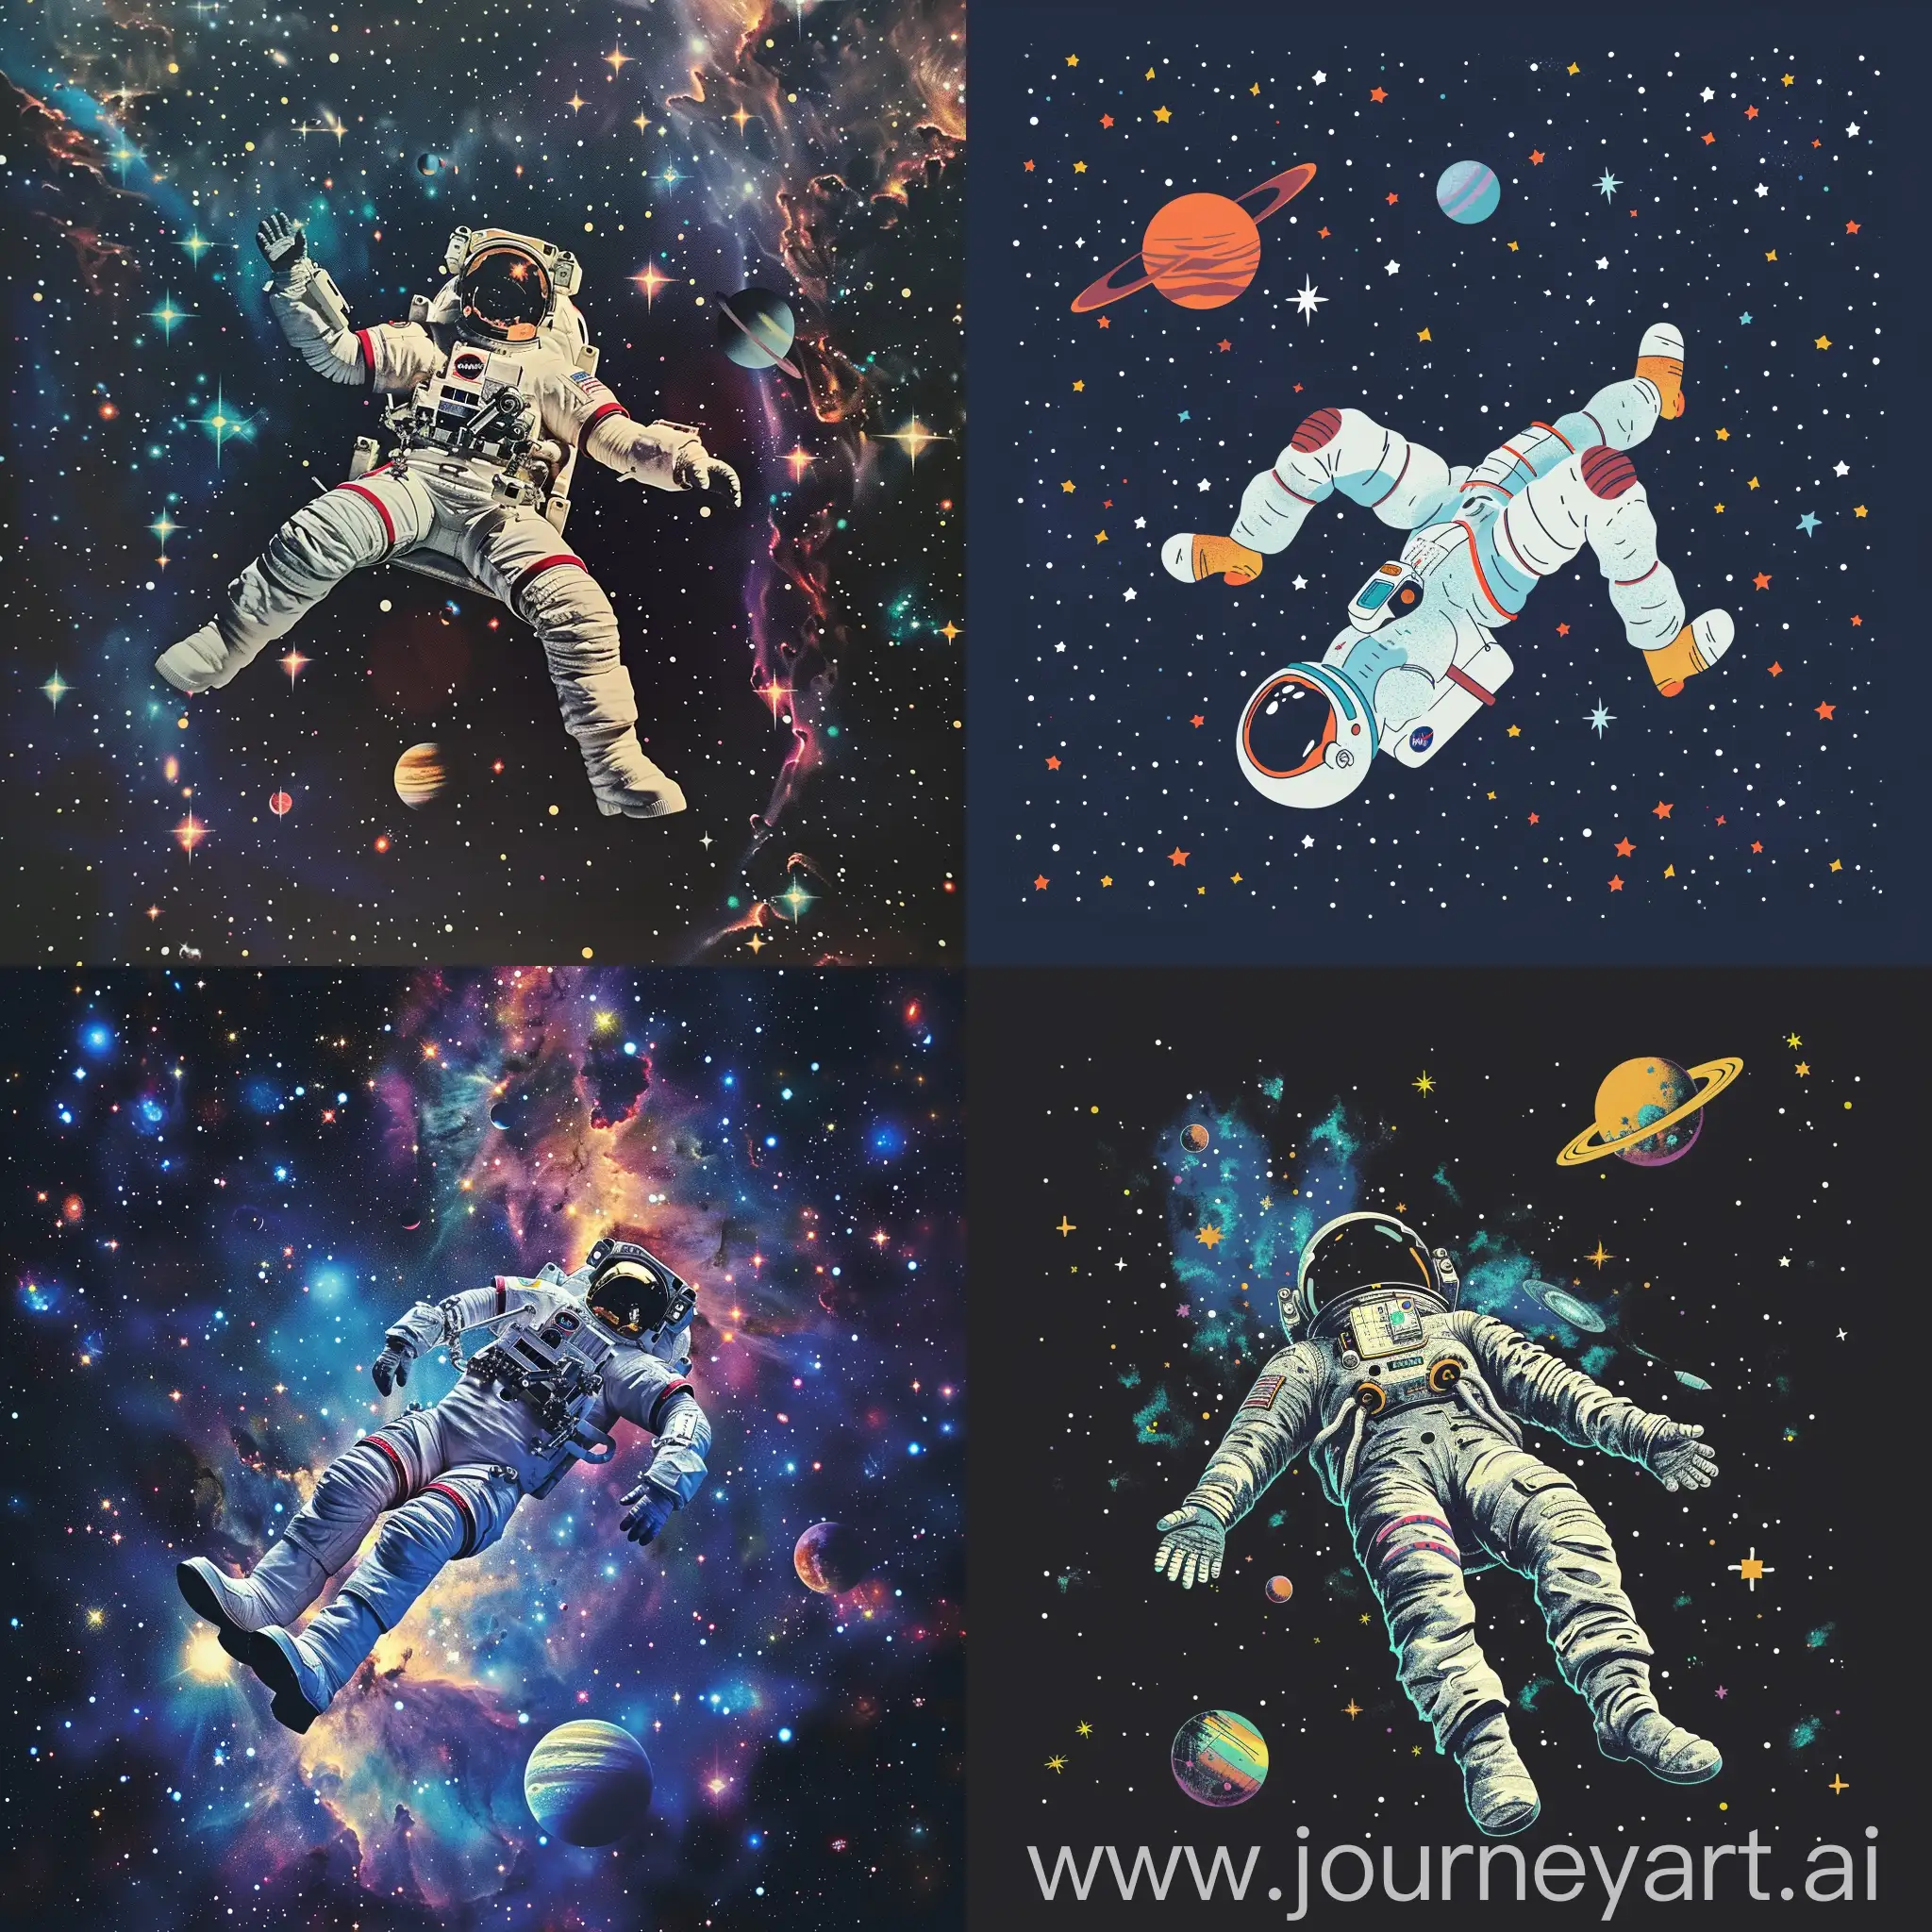 A brave astronaut floating in space, surrounded by stars and planets.